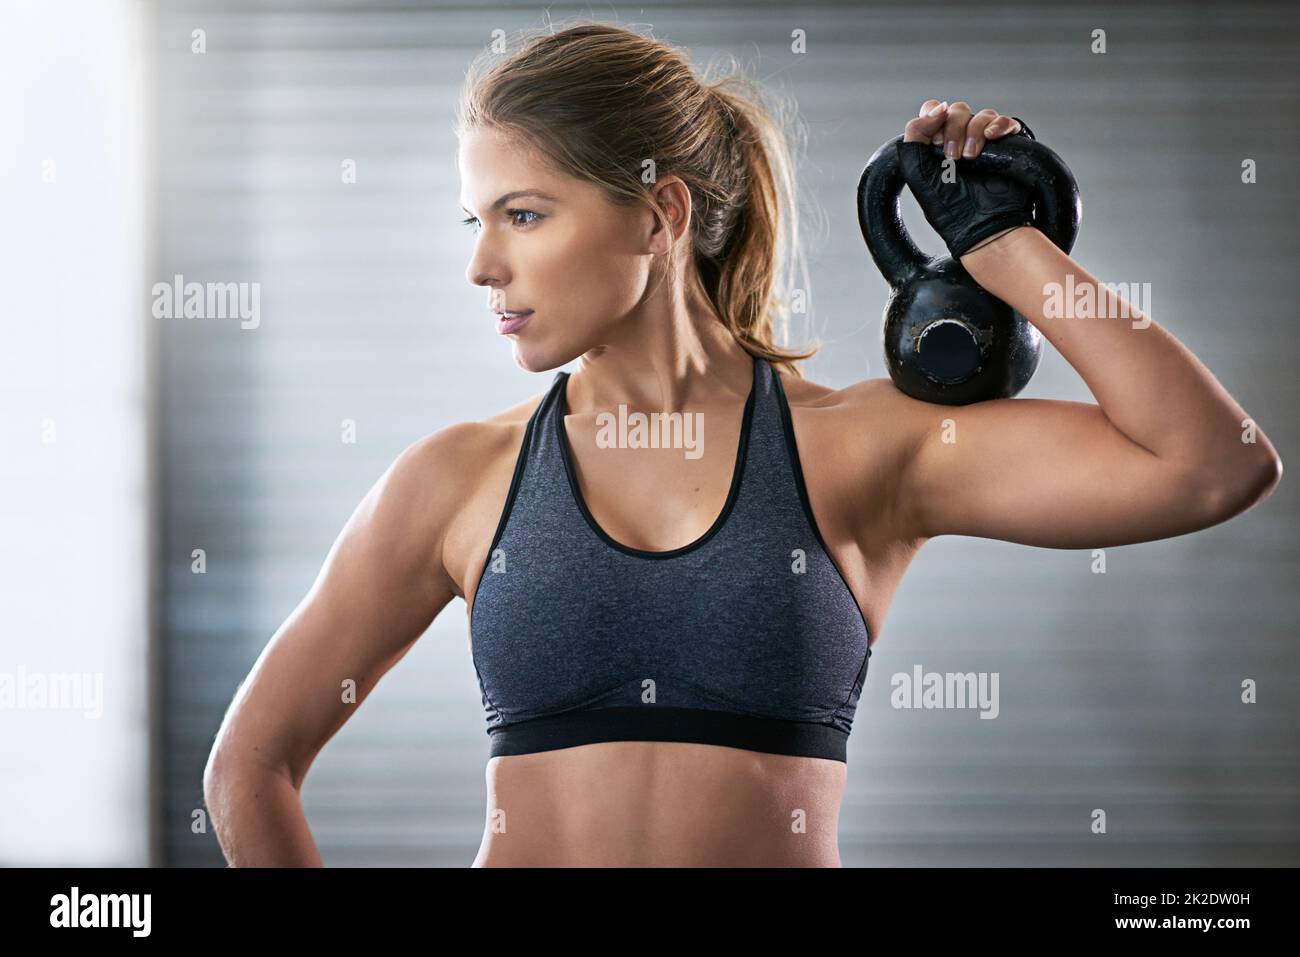 Building her upper body strength. Shot of a young woman working out with a kettle bell at the gym. Stock Photo